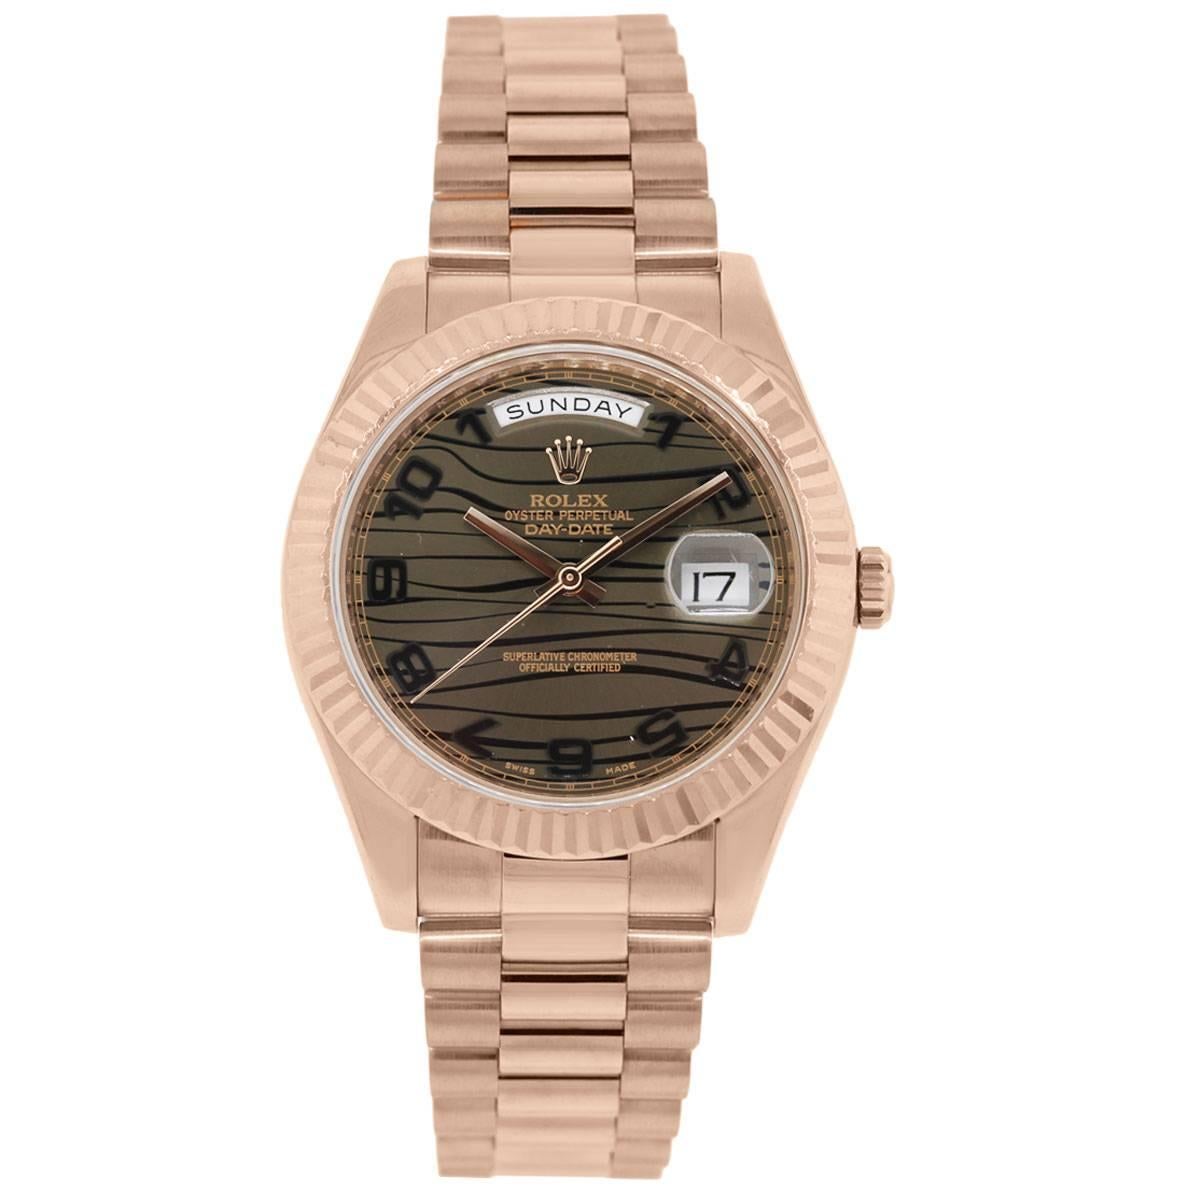 Brand: Rolex
Model: Day-Date II
MPN: 218235
Serial: "G"
Case Material: 18k Rose Gold
Case Diameter: 41 mm
Bezel: 18k rose gold fluted bezel
Dial: Bronze wave dial with day and date window
Movement: Automatic
Size: Will fit a 7.5"